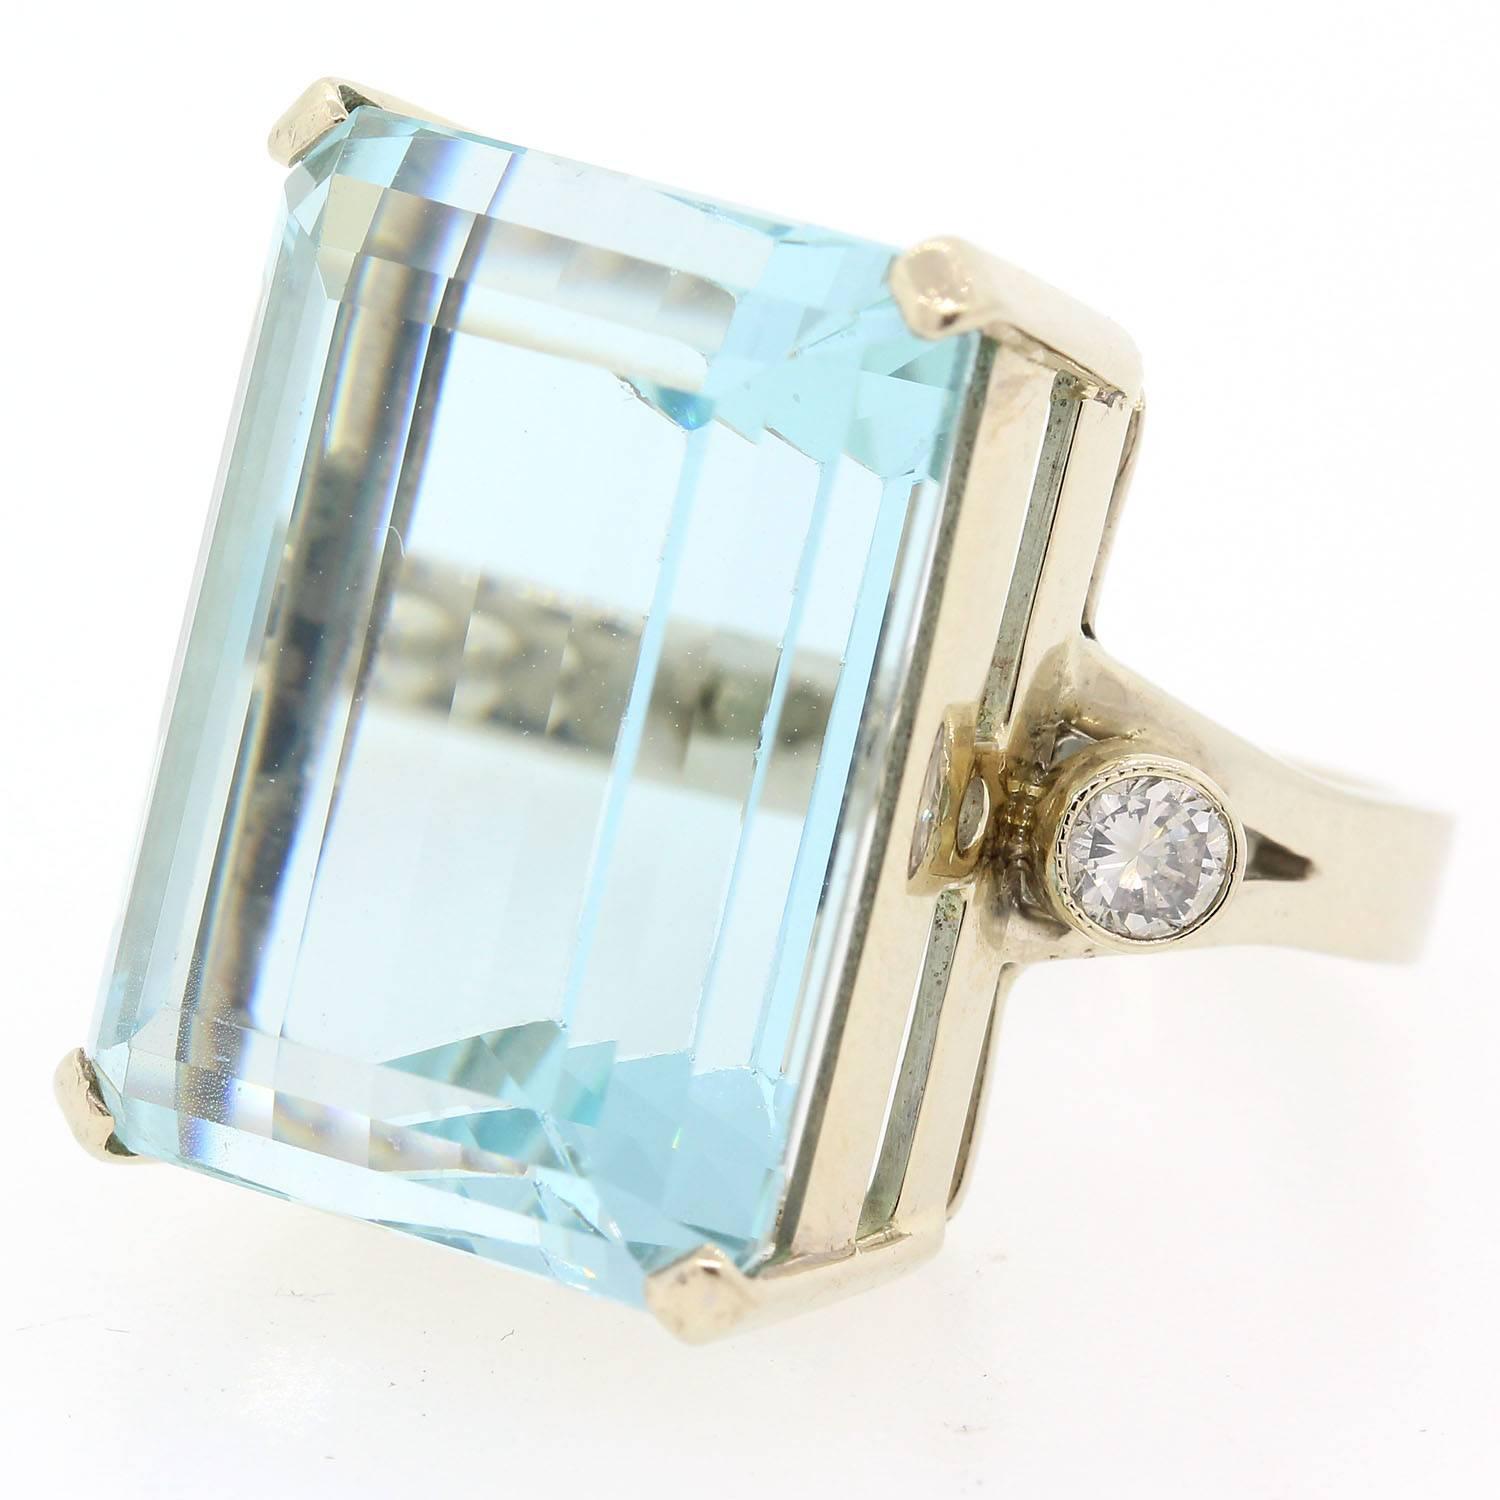 Elegant simplicity.  This beautiful 25 carat Emerald Cut Aquamarine is nested in a 14KT white gold setting.   Two Round Brilliant Cut Diamonds enhance the sides of the ring.  Circa 1960s